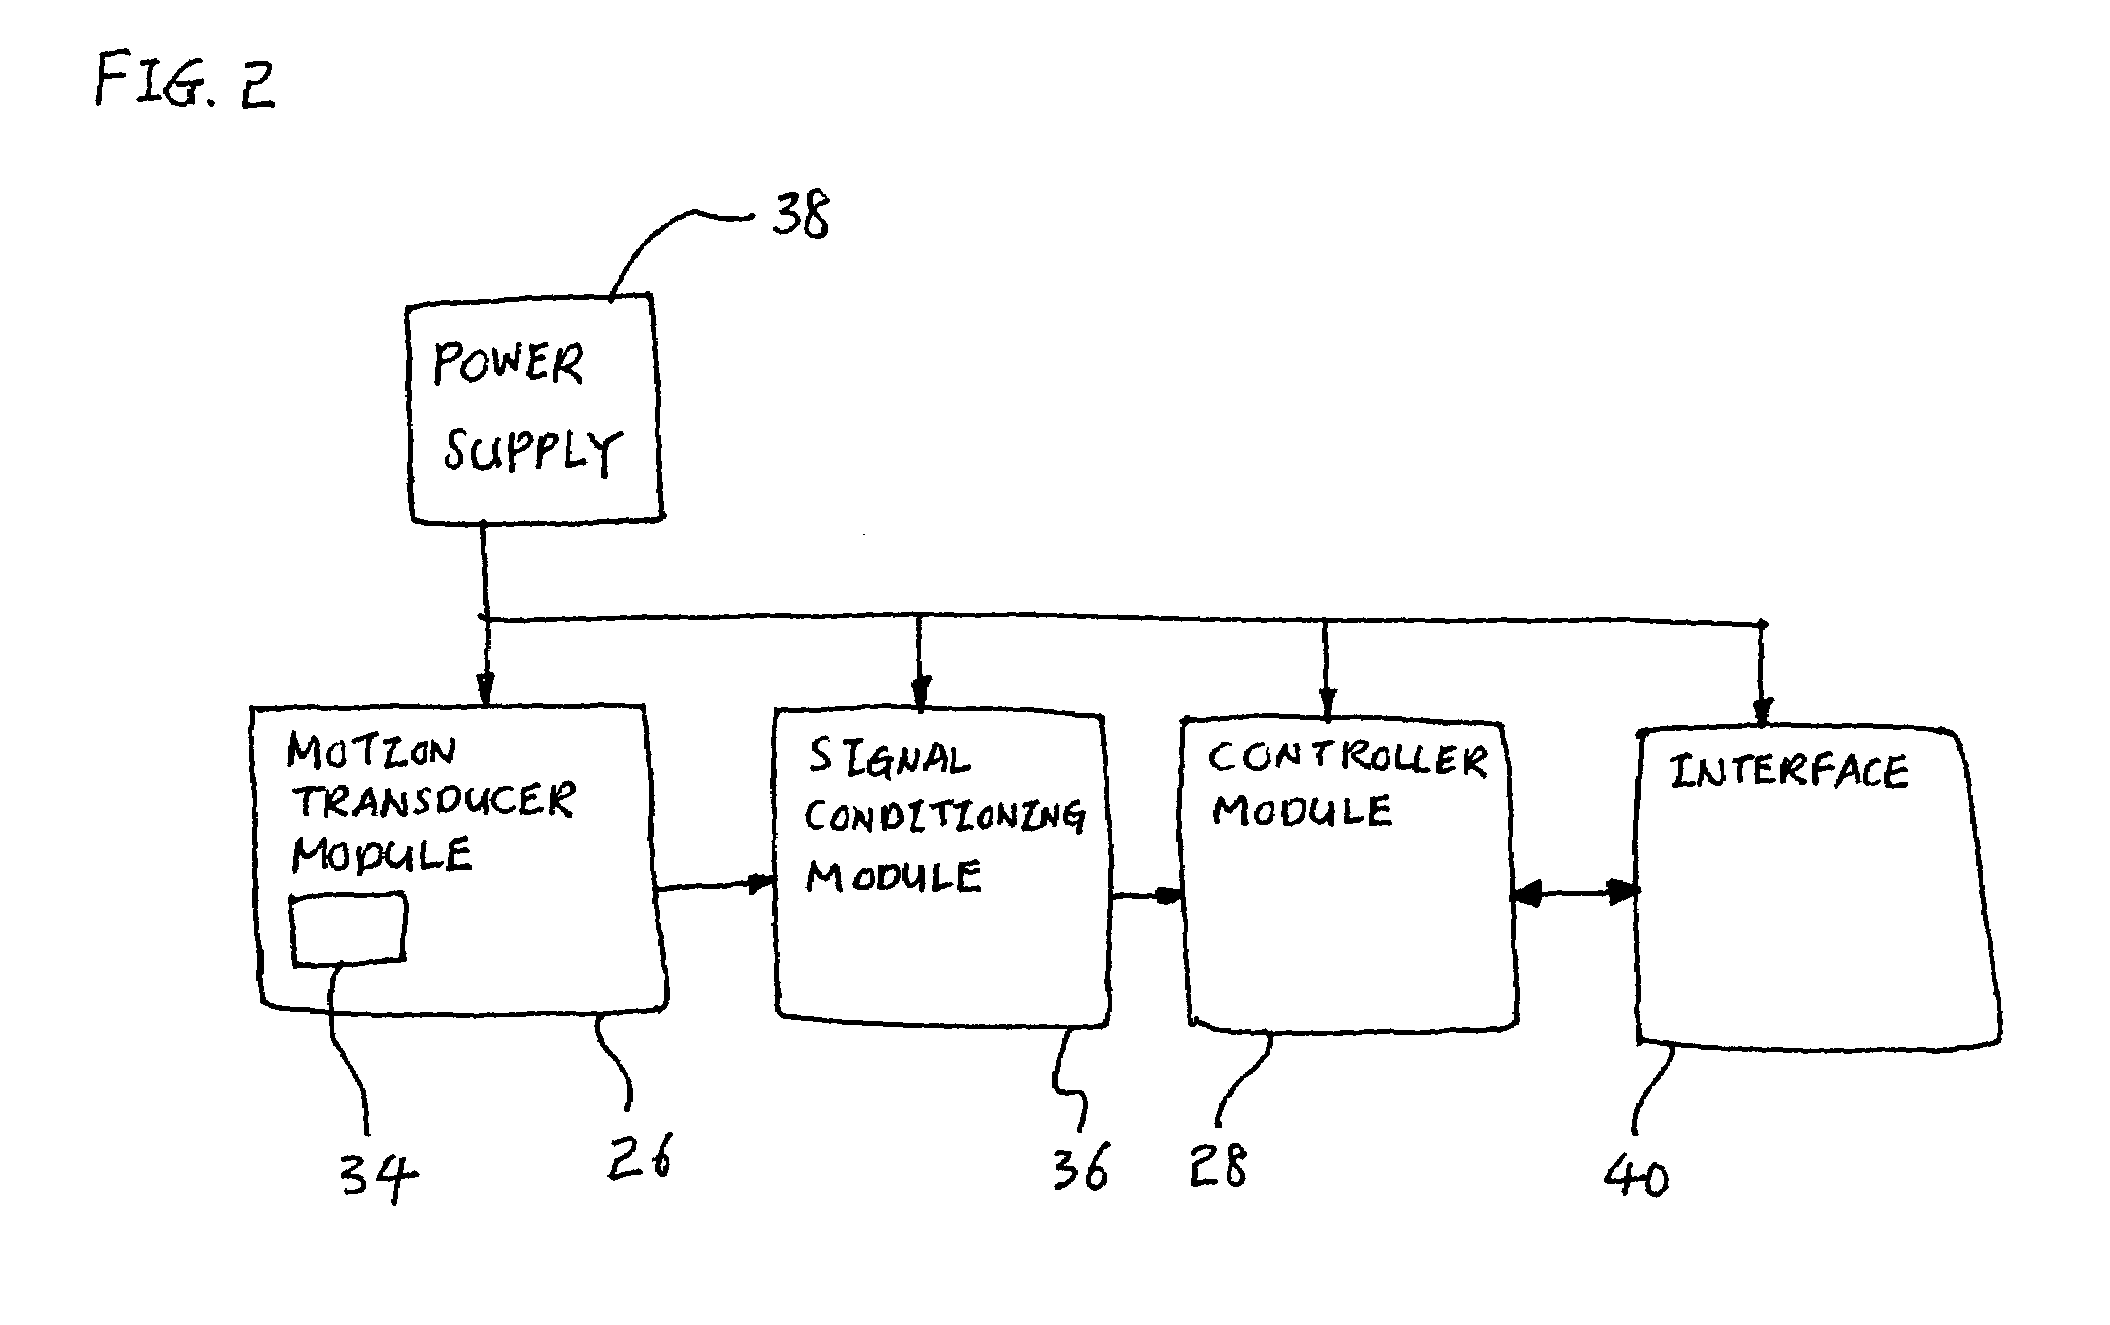 Method and system for preventing erroneous starting of a vehicle having a manual transmission